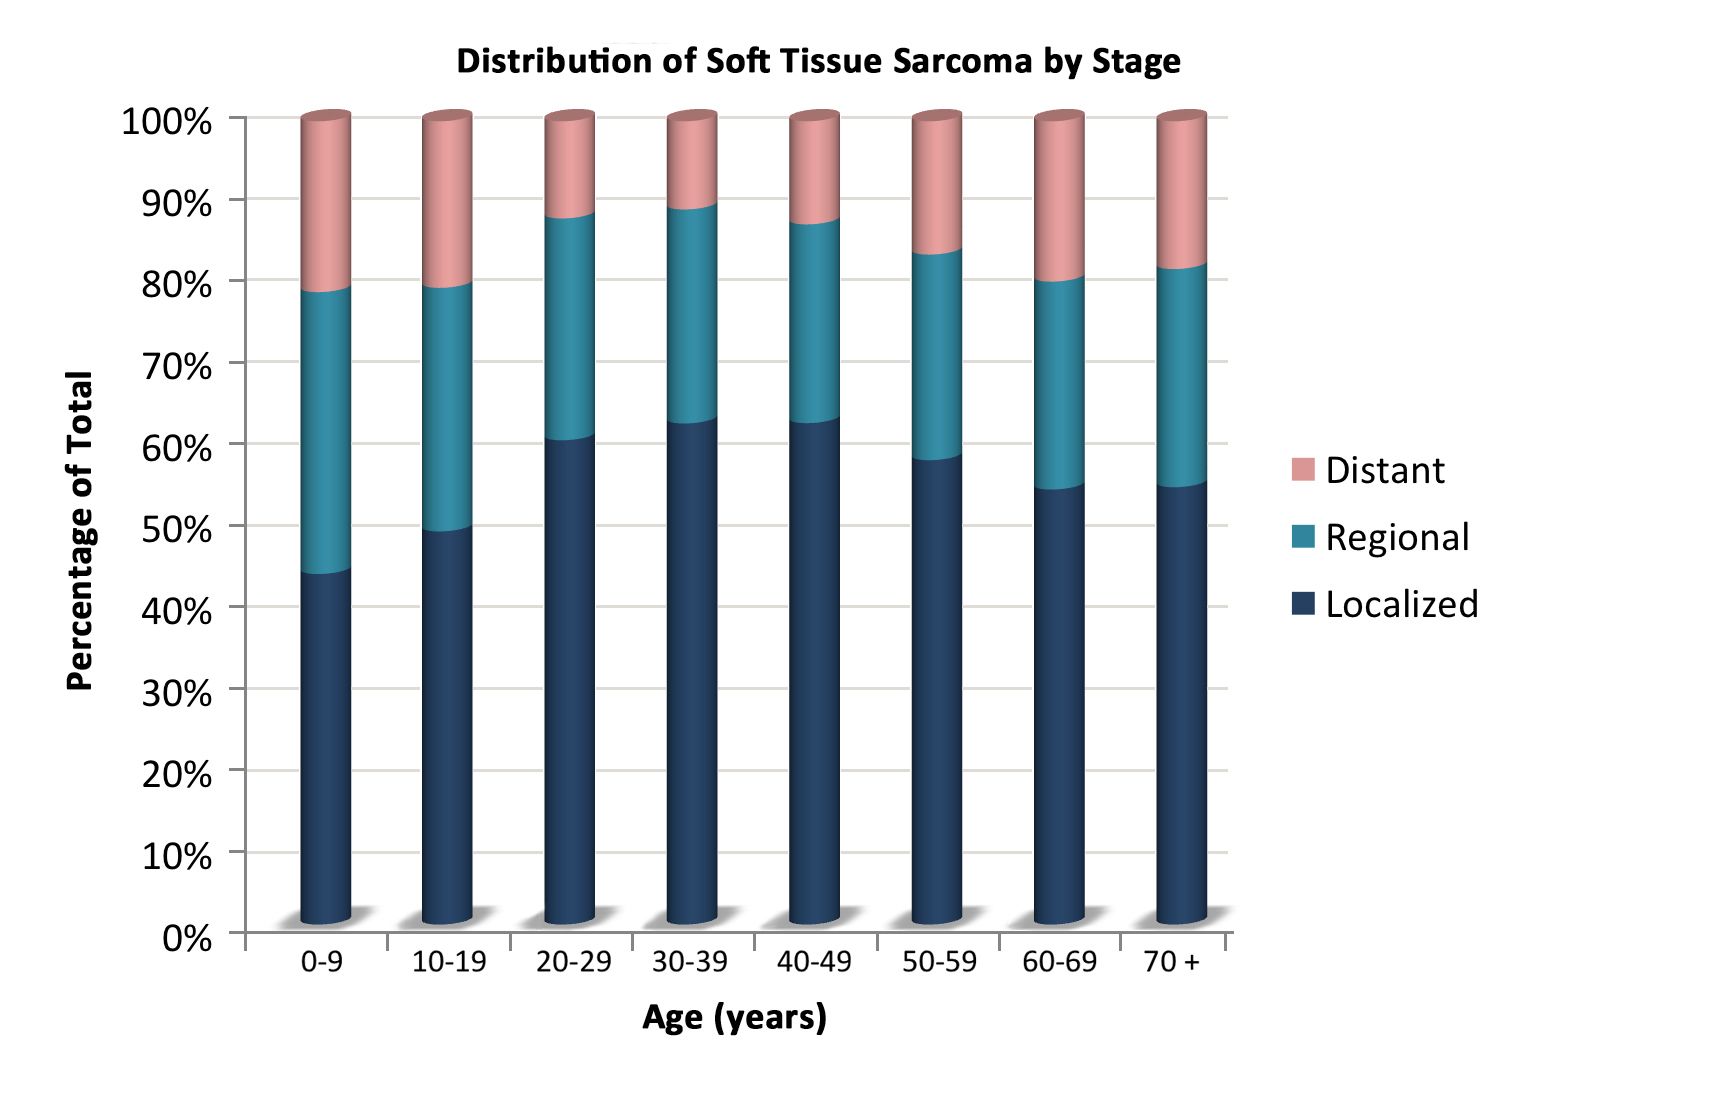 Chart showing the distribution of nonrhabdomyosarcomatous soft tissue sarcomas by age according to stage.